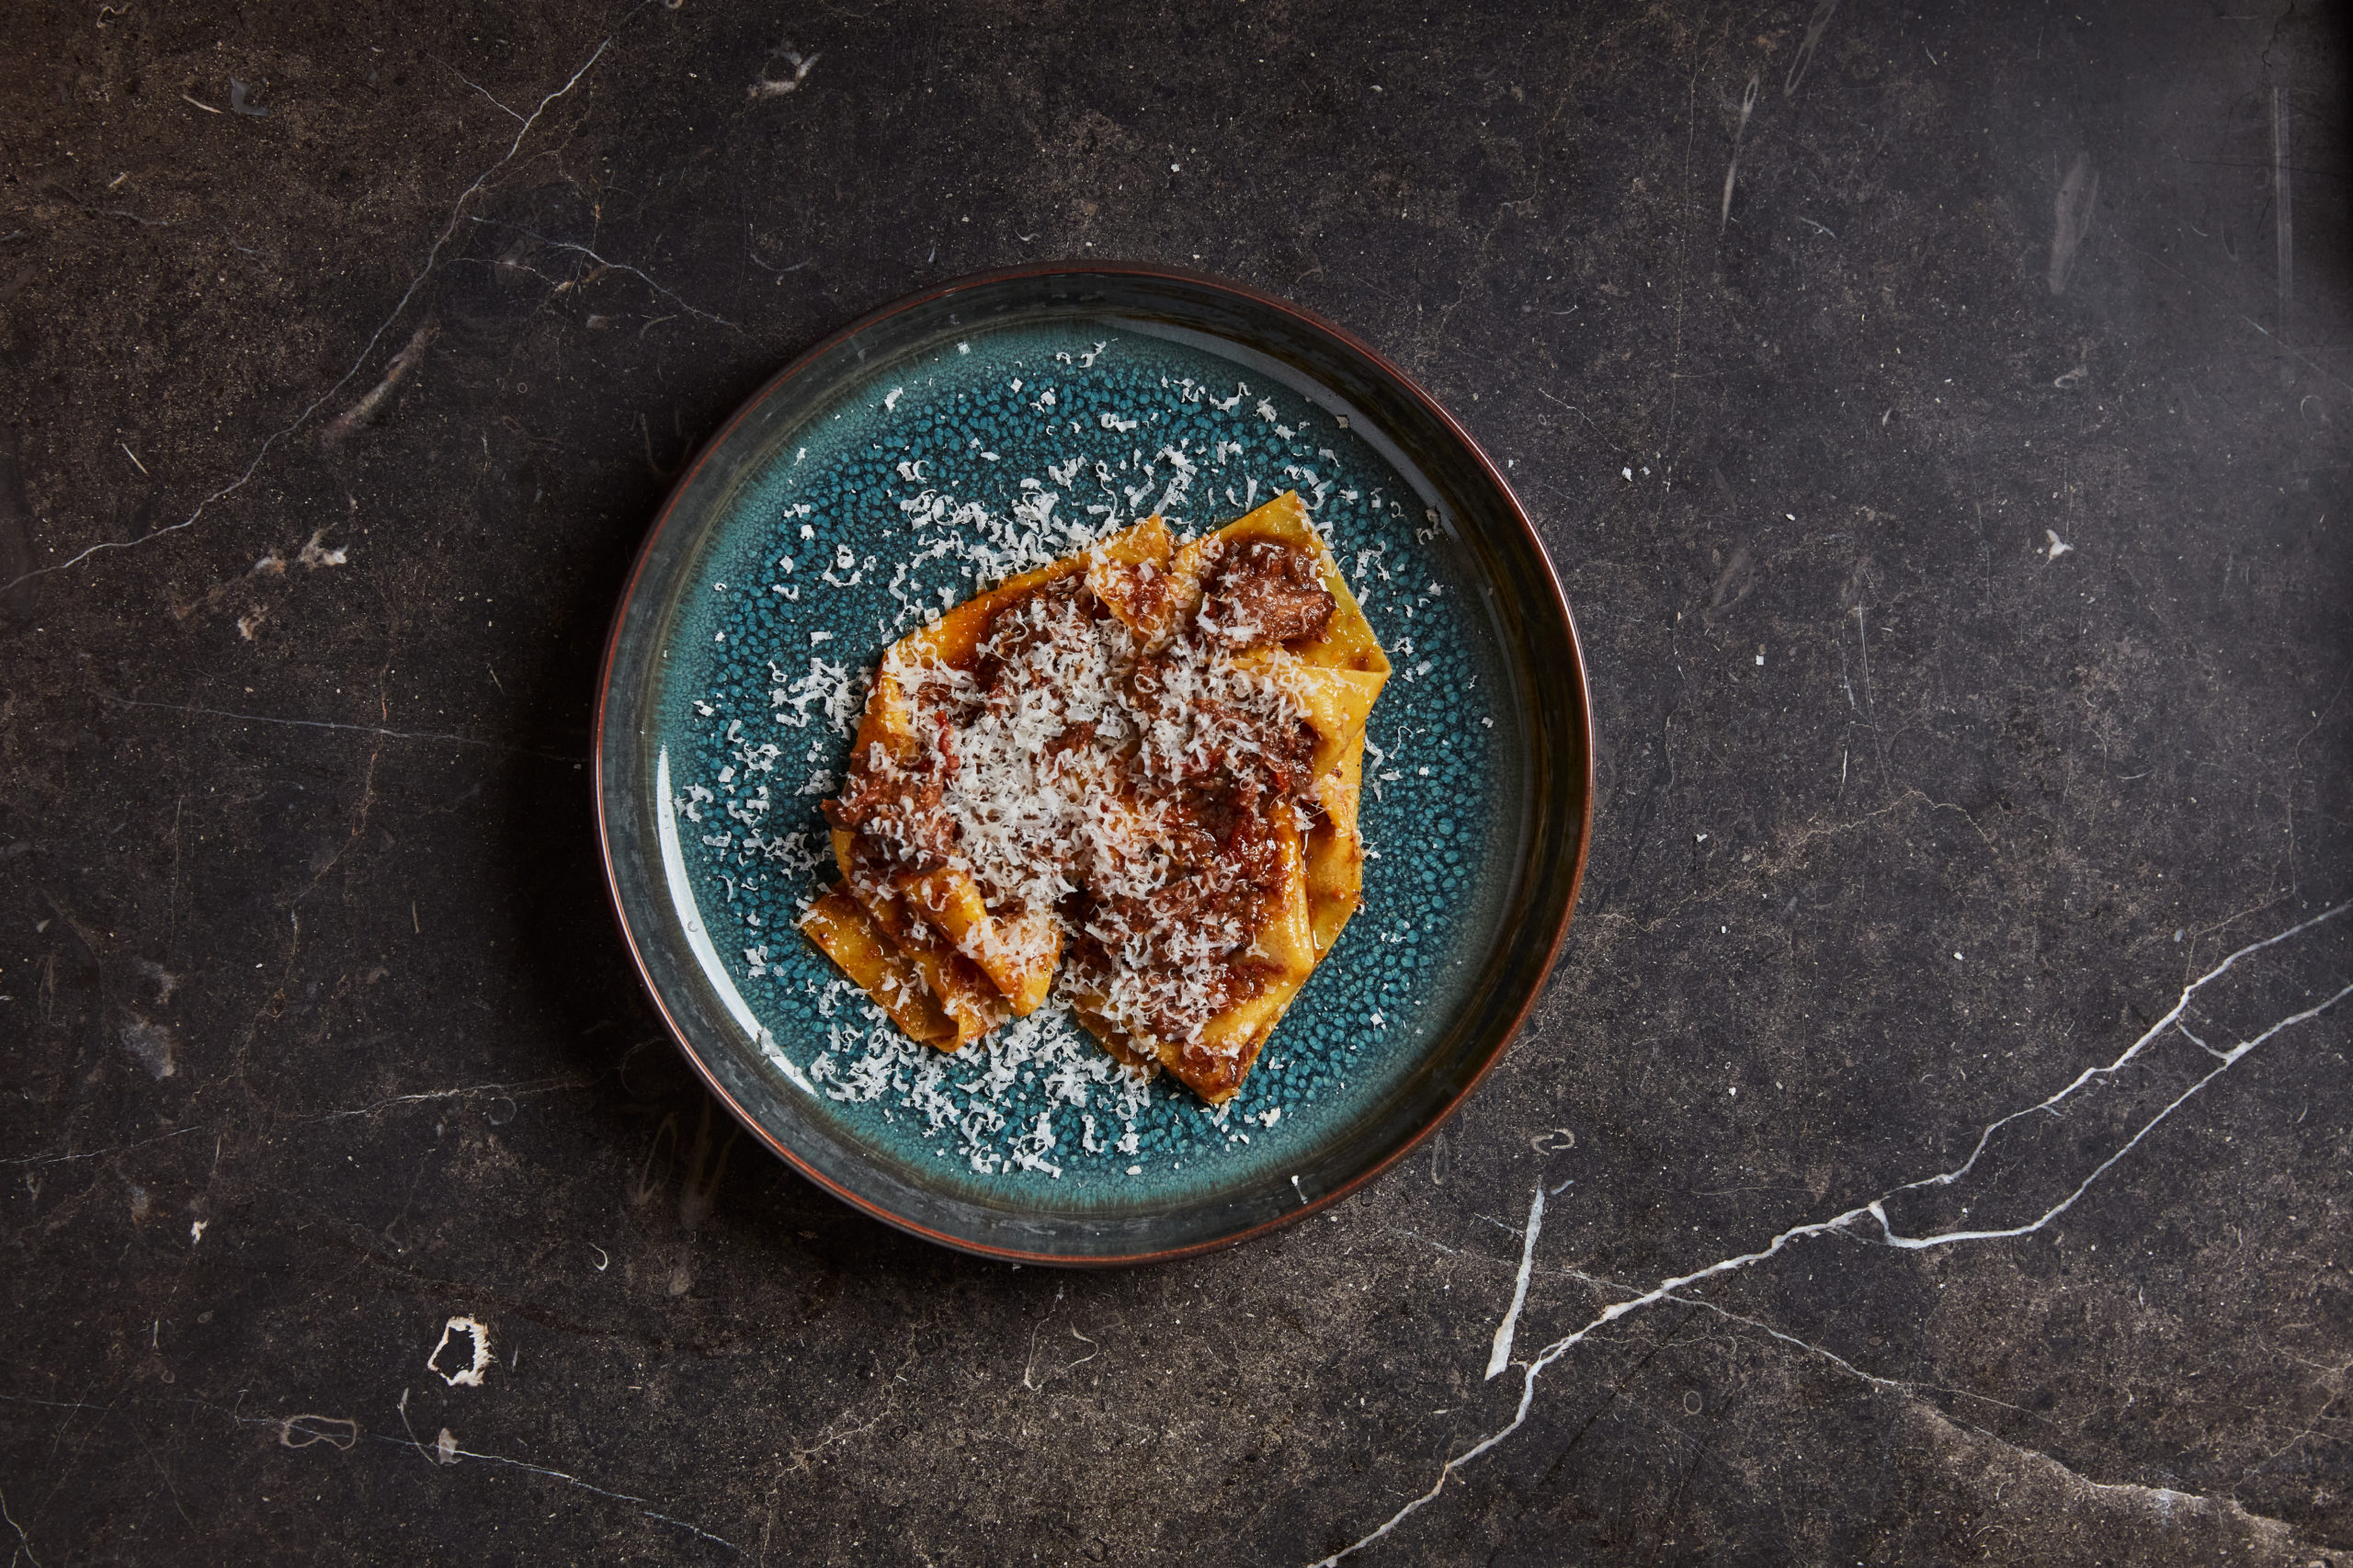 Fazzoletti ( fresh pasta from UOVO) with braised beef ragu and parmigiano